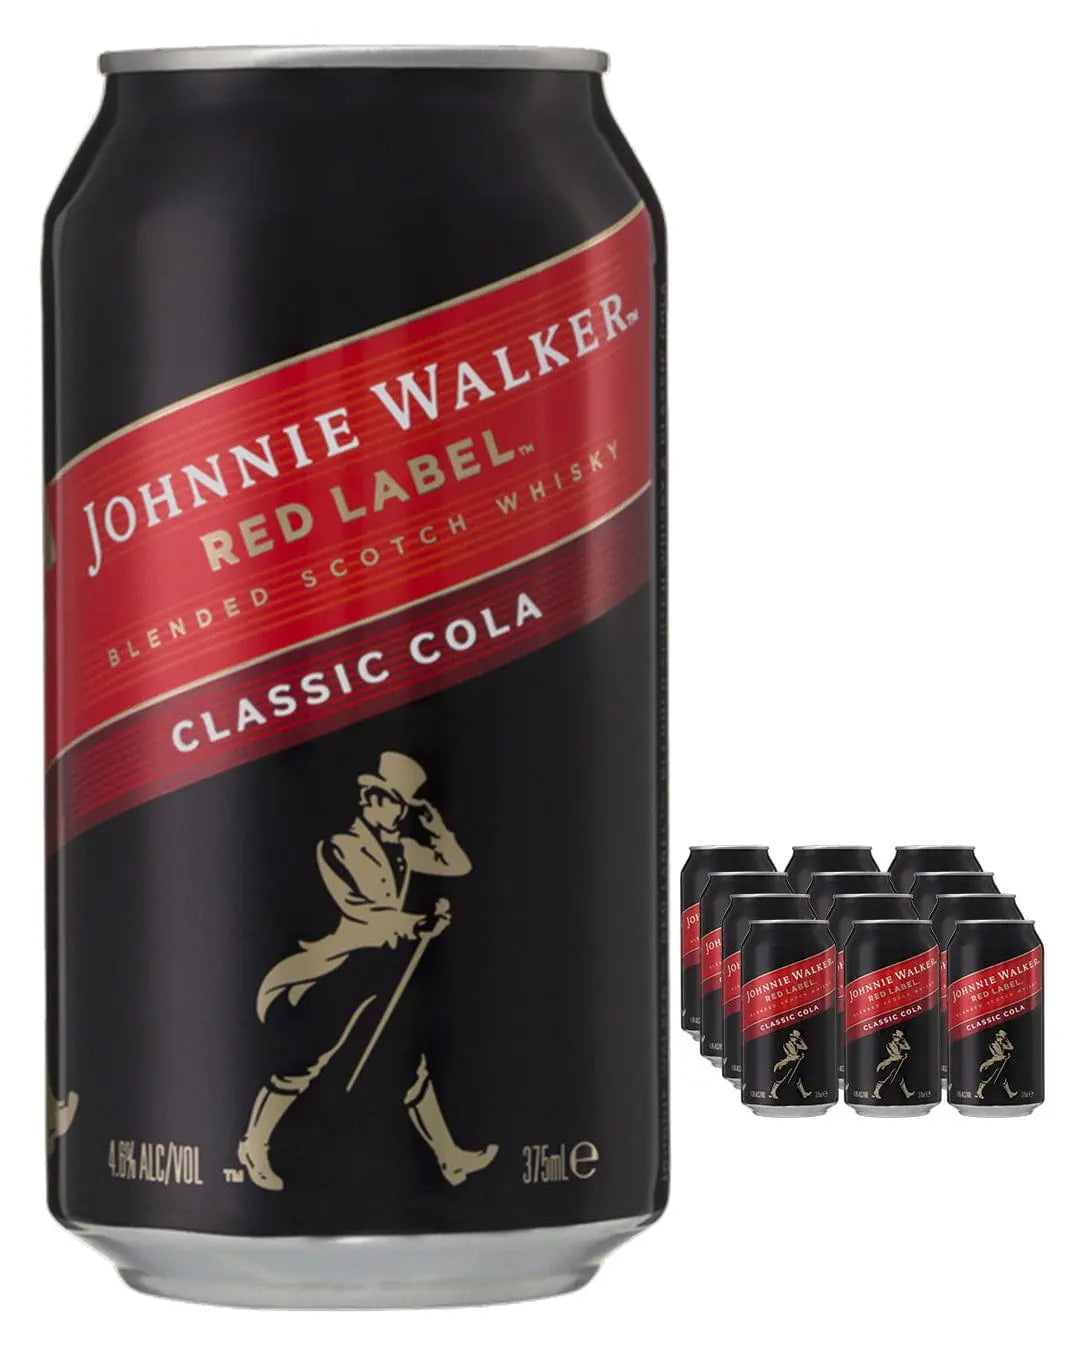 Johnnie Walker Red Label And Cola Premixed Cocktail Can Multipack, 12 x 330 ml Ready Made Cocktails